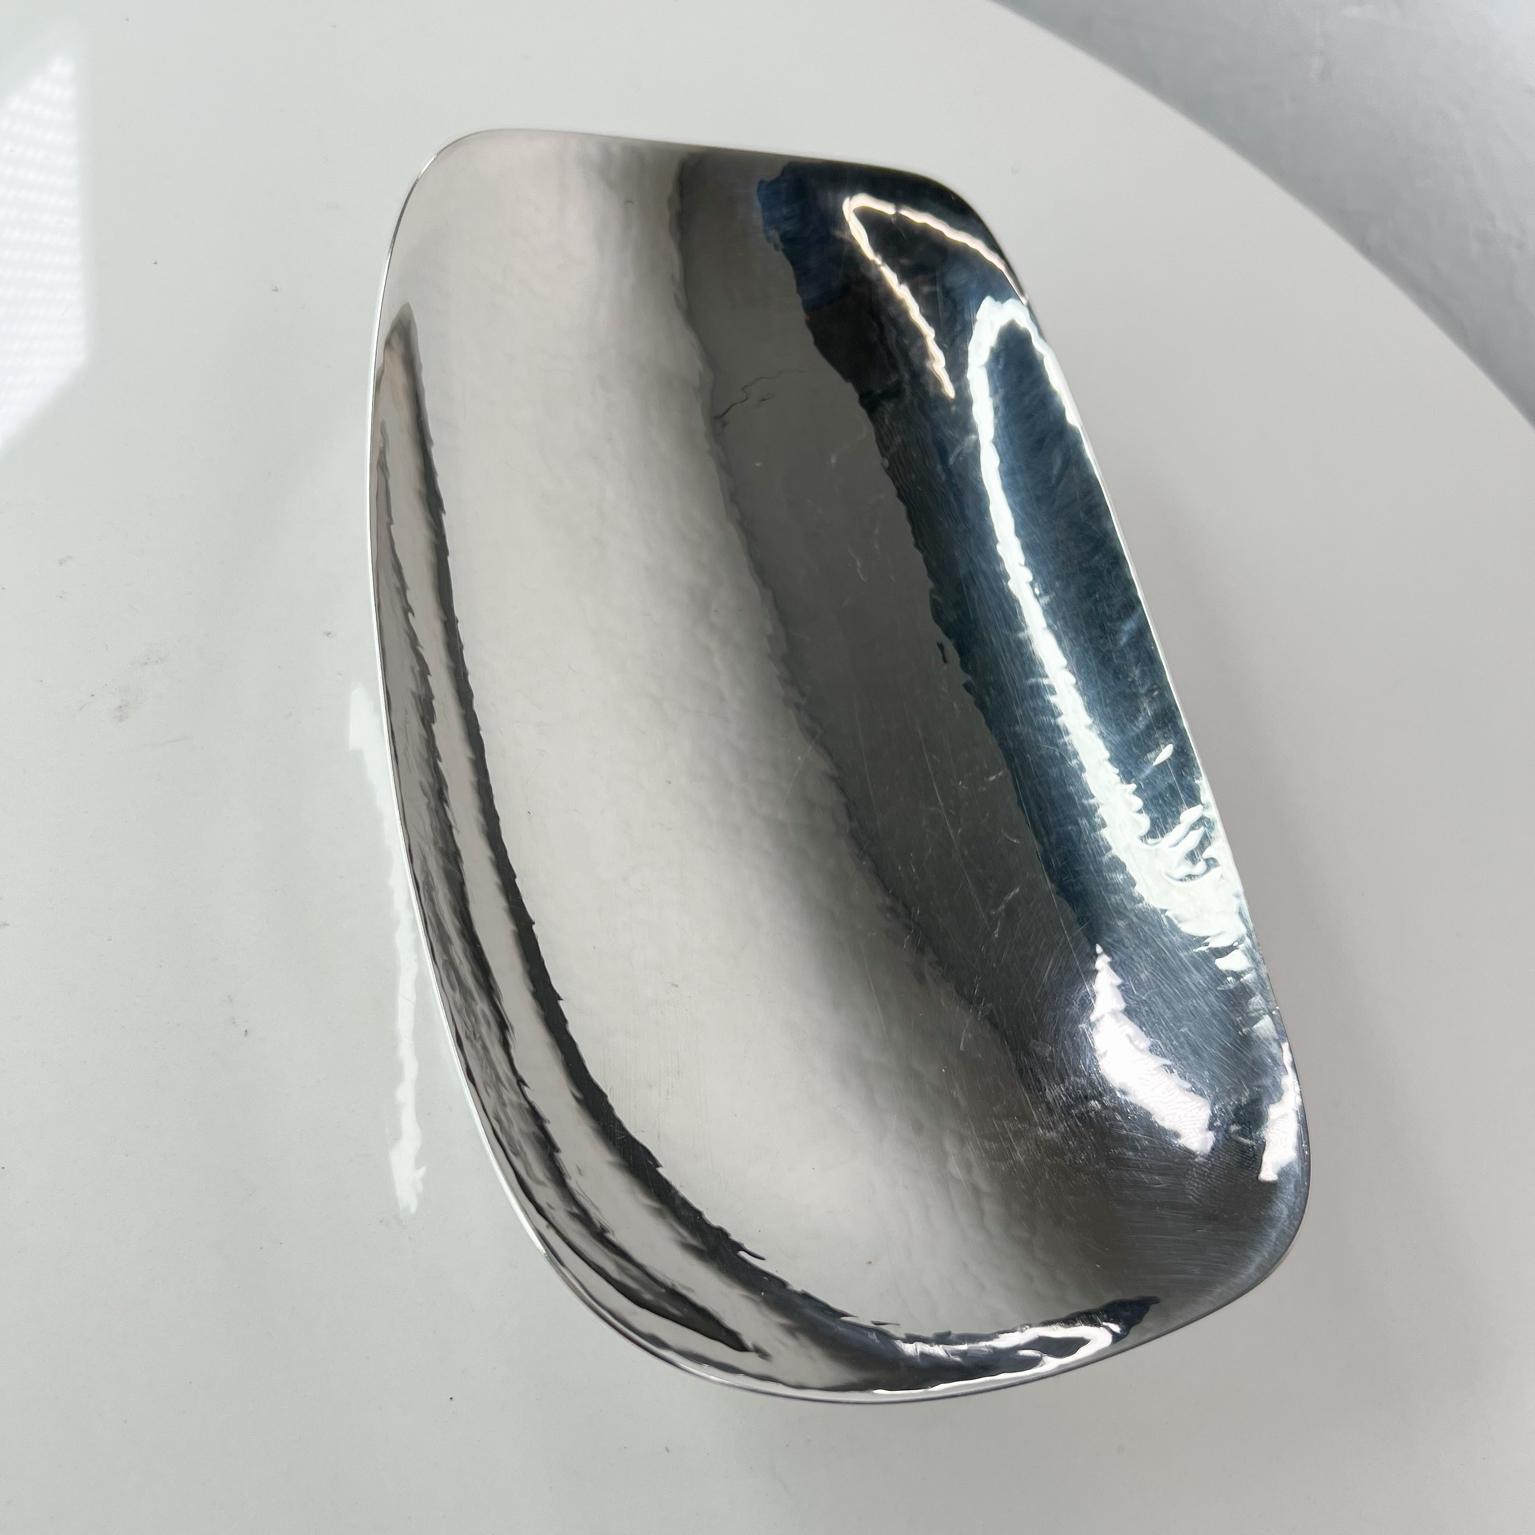 Stainless Steel 1940s Modernist Sculptural Chrome Dish Footed Keswick School Industrial Arts UK